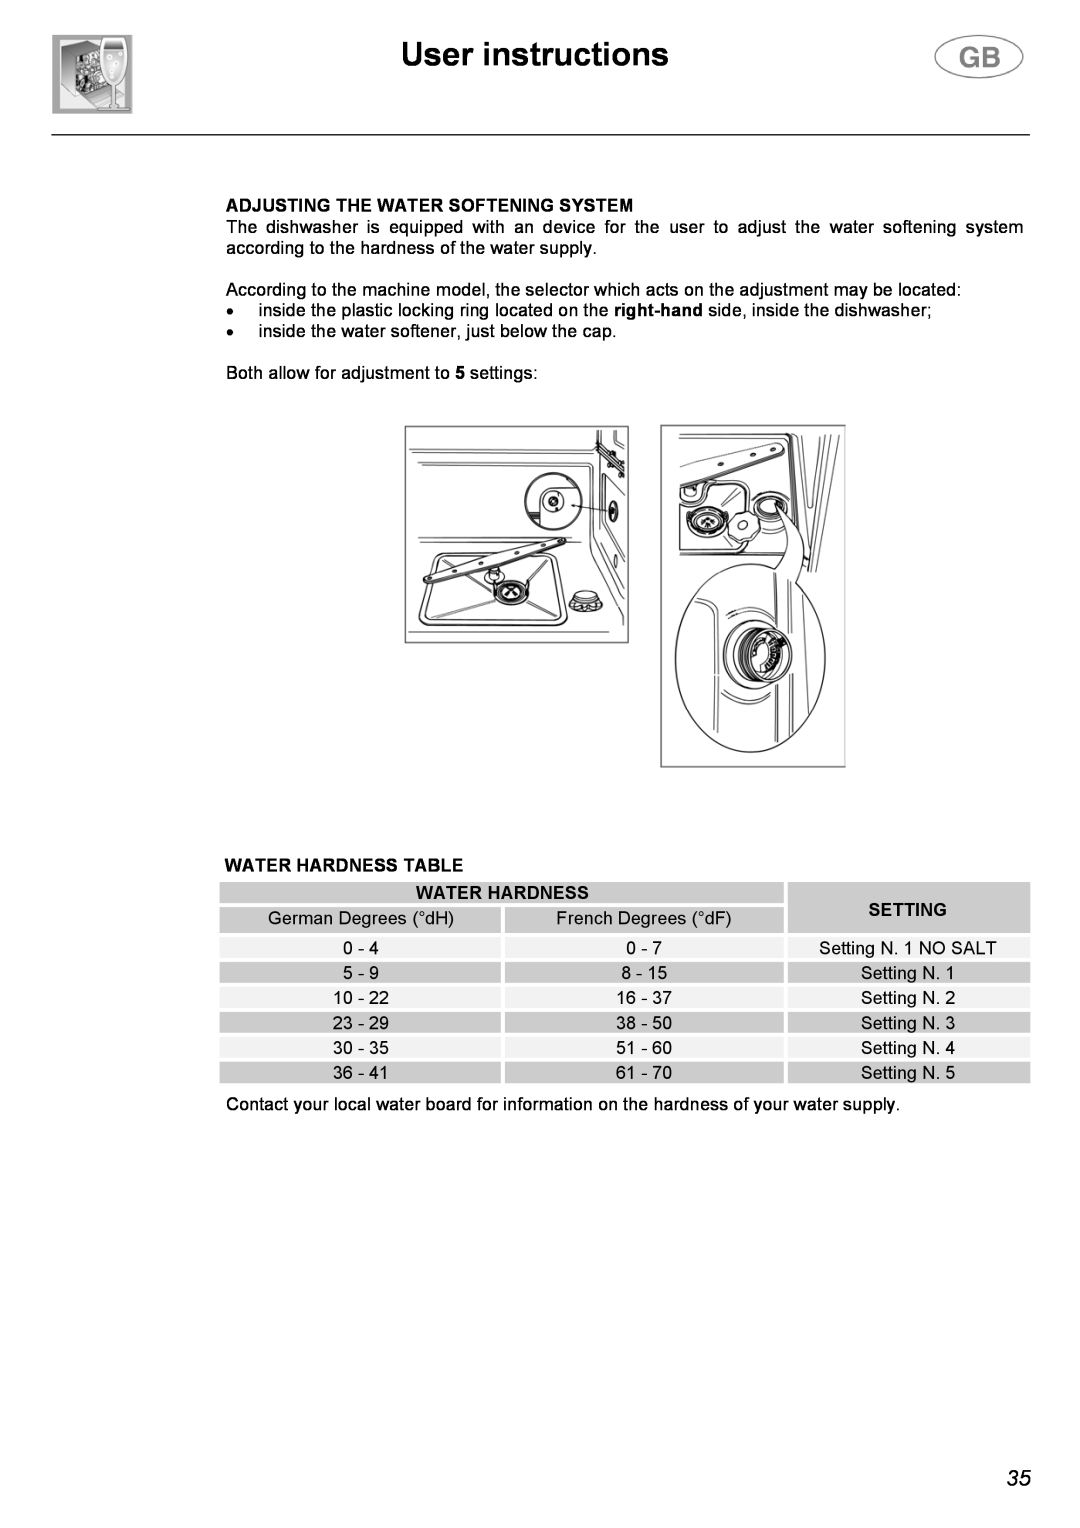 Smeg EL05 instruction manual User instructions, Adjusting The Water Softening System, Water Hardness Table, Setting 